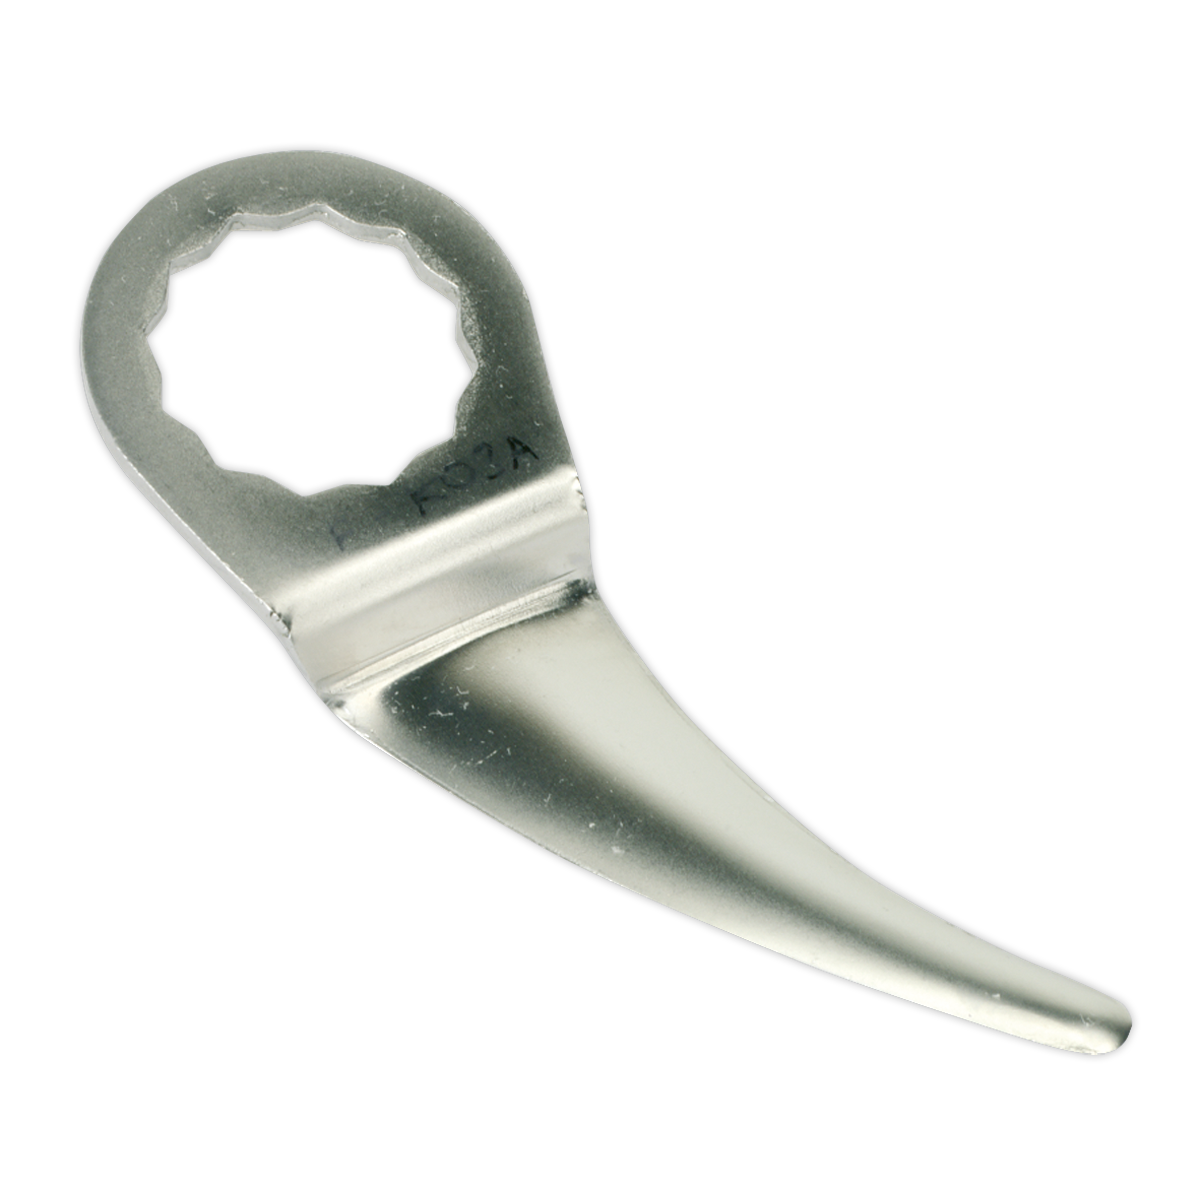 Air Knife Blade - 50mm - Offset Curved - WK025FSC50 - Farming Parts